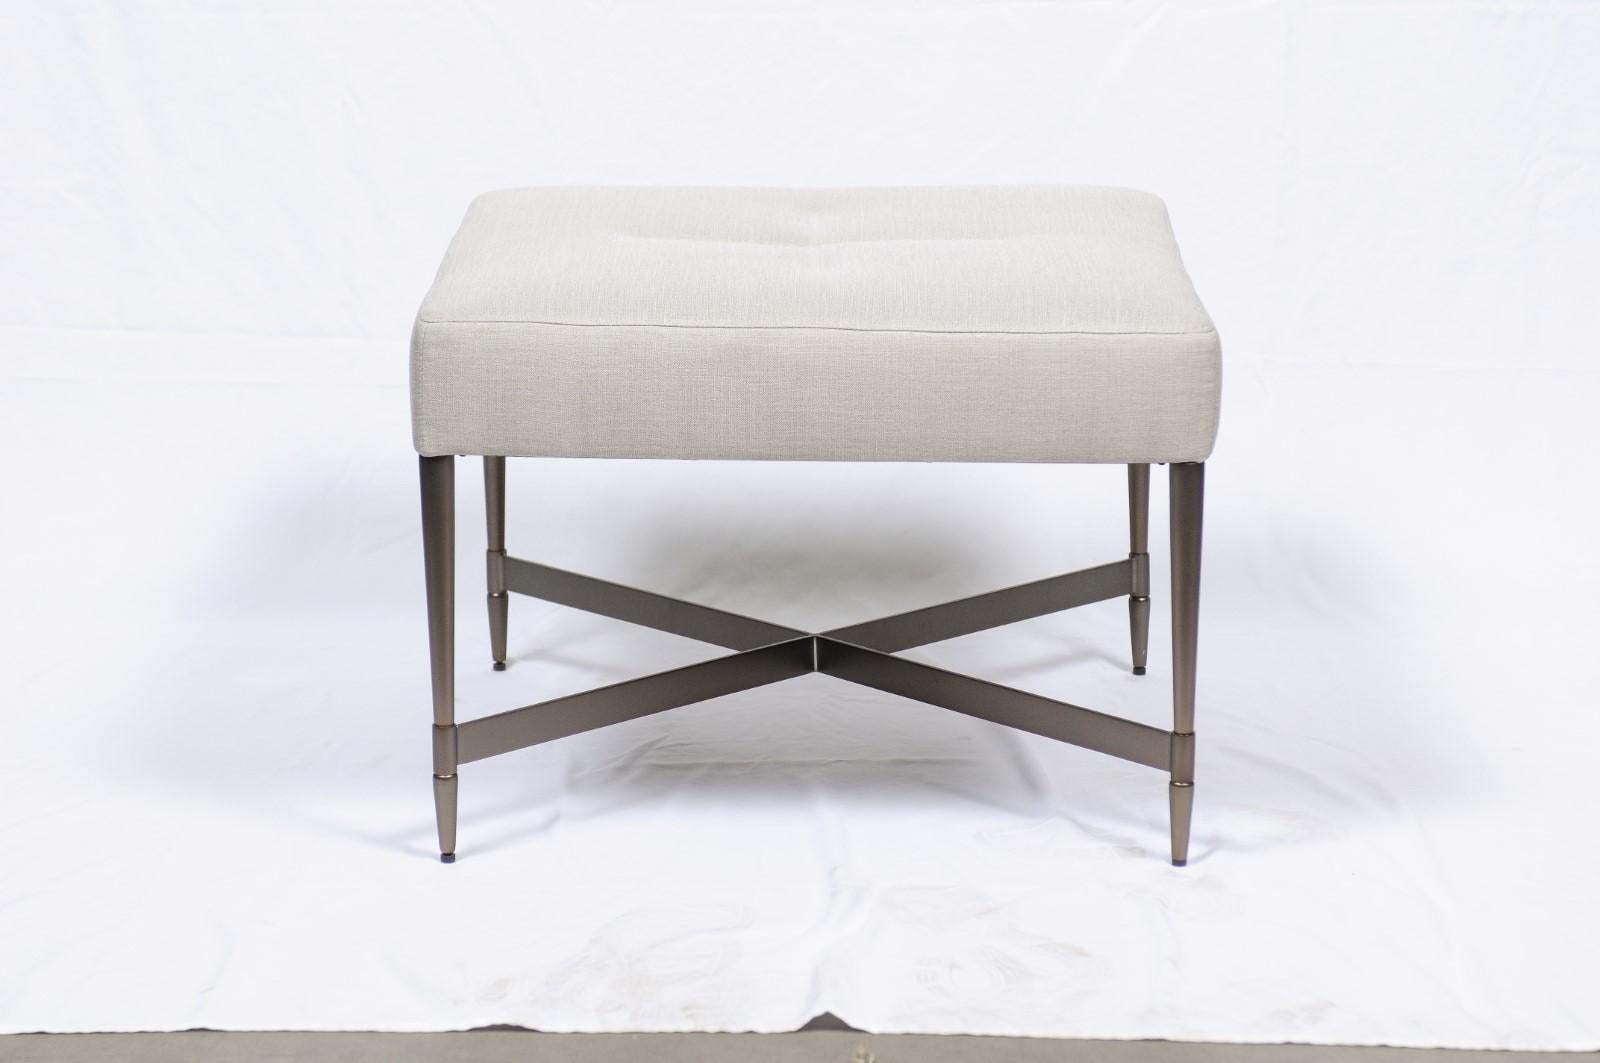 The simple seat has a dressmaker detail of tight stitching while the bronze legs and X-stretcher sit atop a finely turned foot. A useful addition to any room, the Madison Square Tabouret offers impromptu seating or a cocktail table alternative.